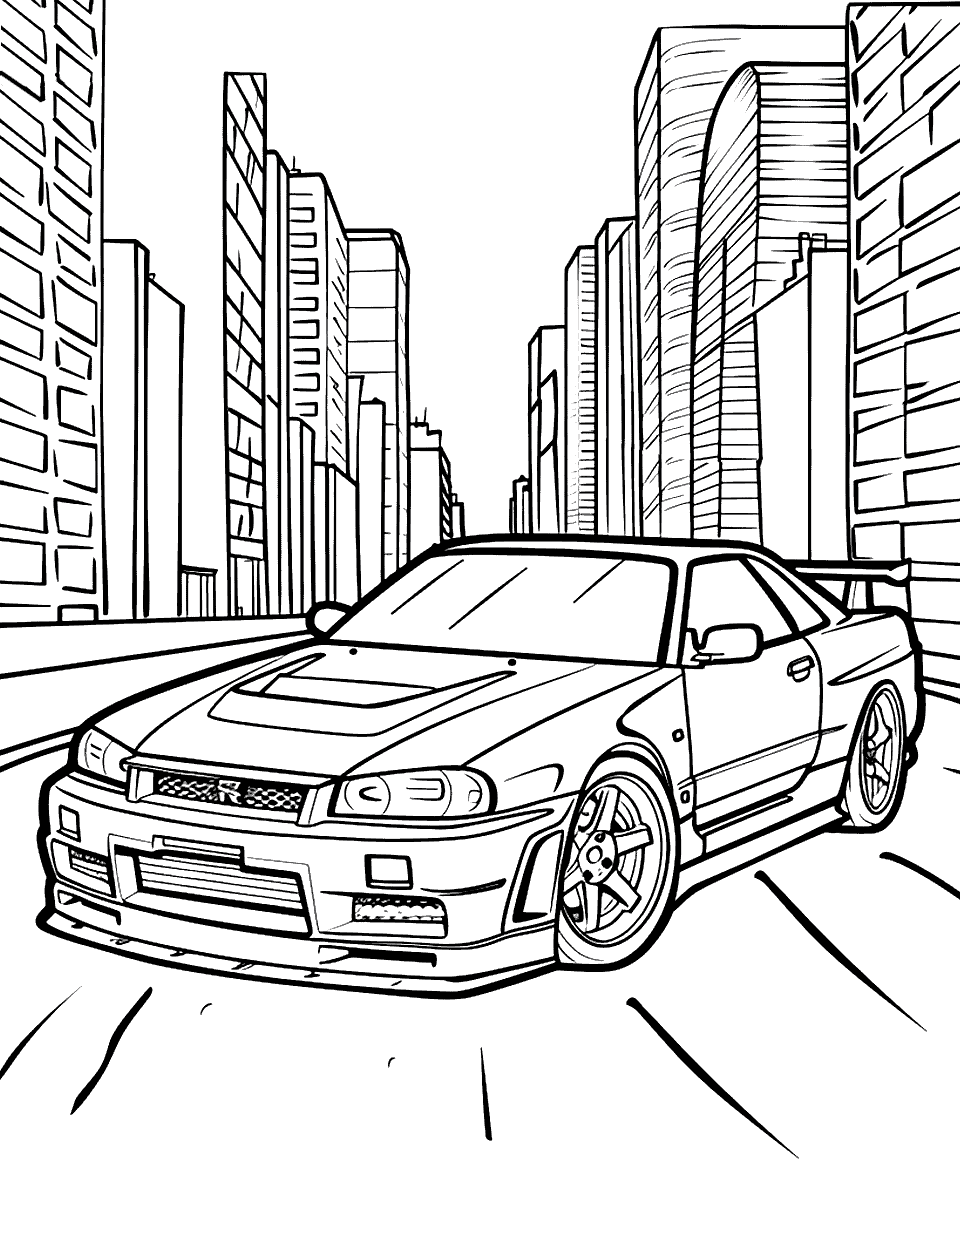 Nissan R34 Skyline Cruise Coloring Page - A Nissan R34 Skyline cruising down a city street, skyscrapers on either side.